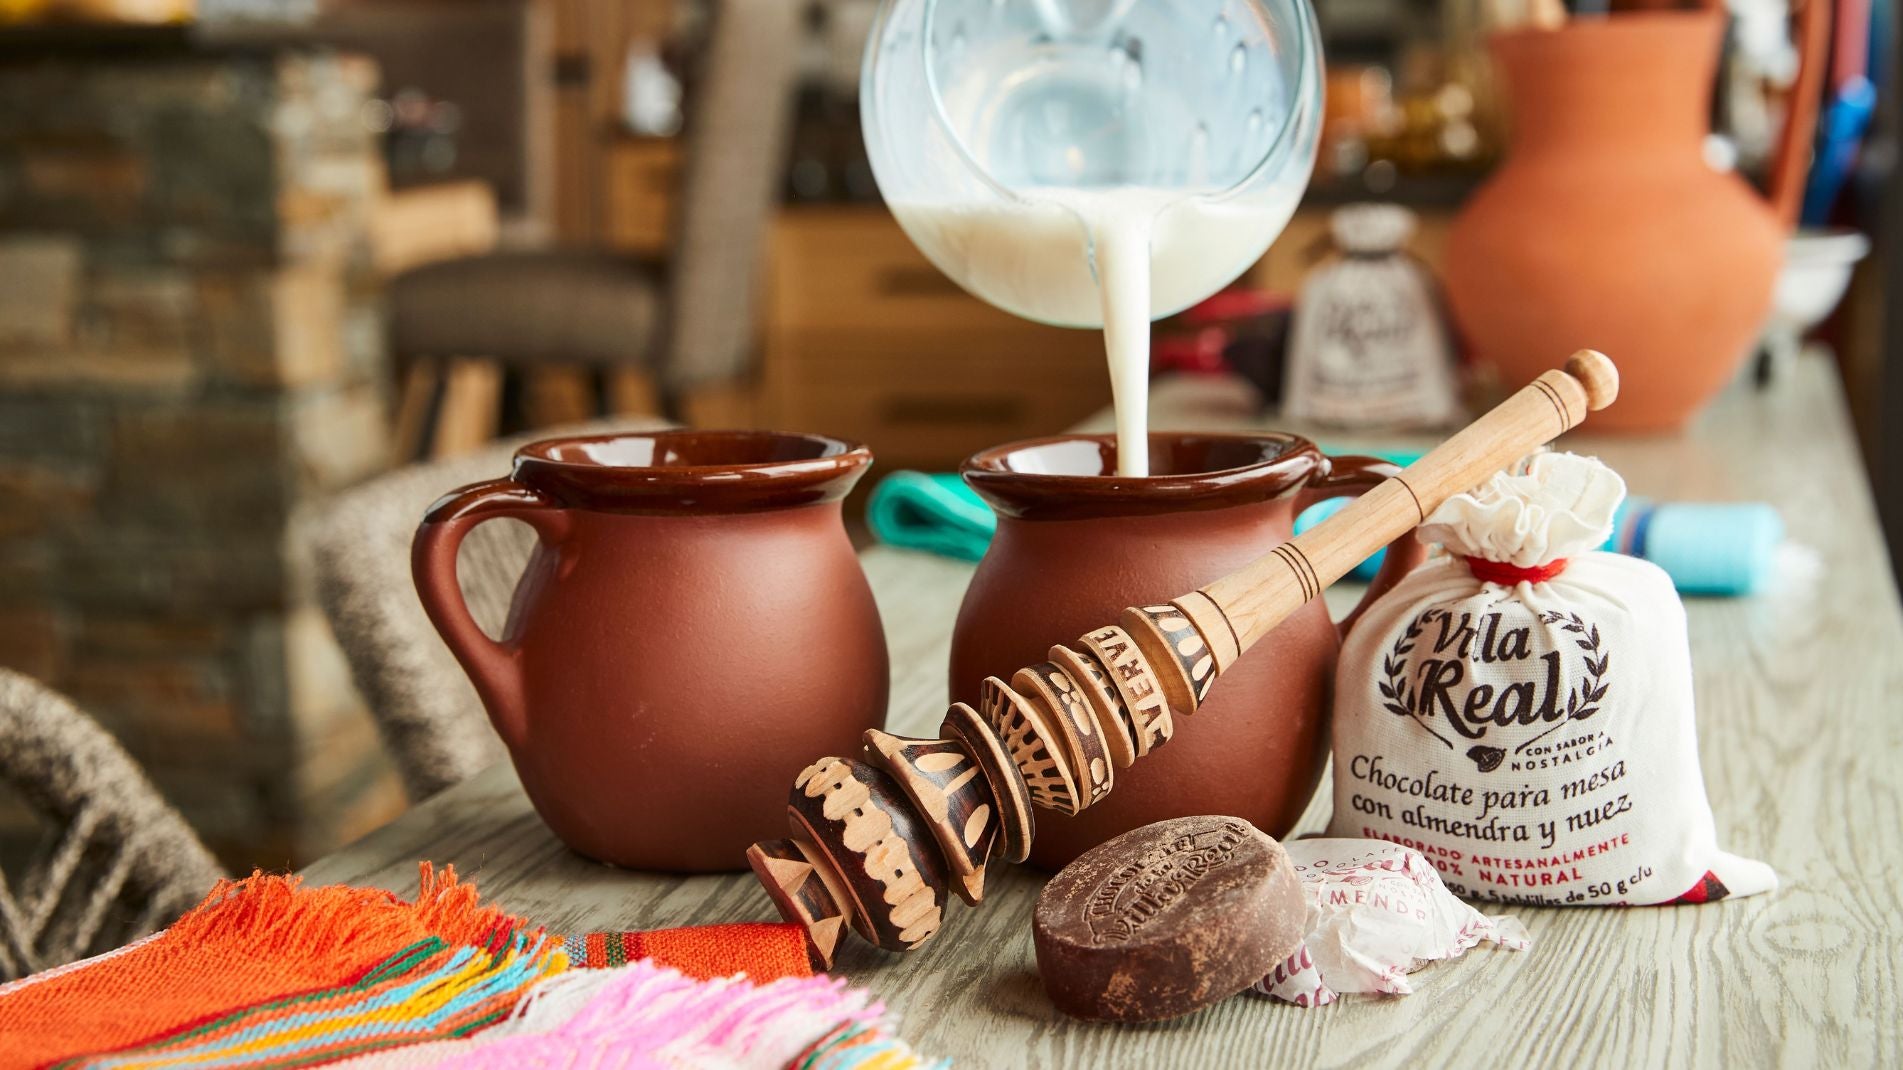 A Molinillo Whisk Is Essential for Making the Best Hot Chocolate